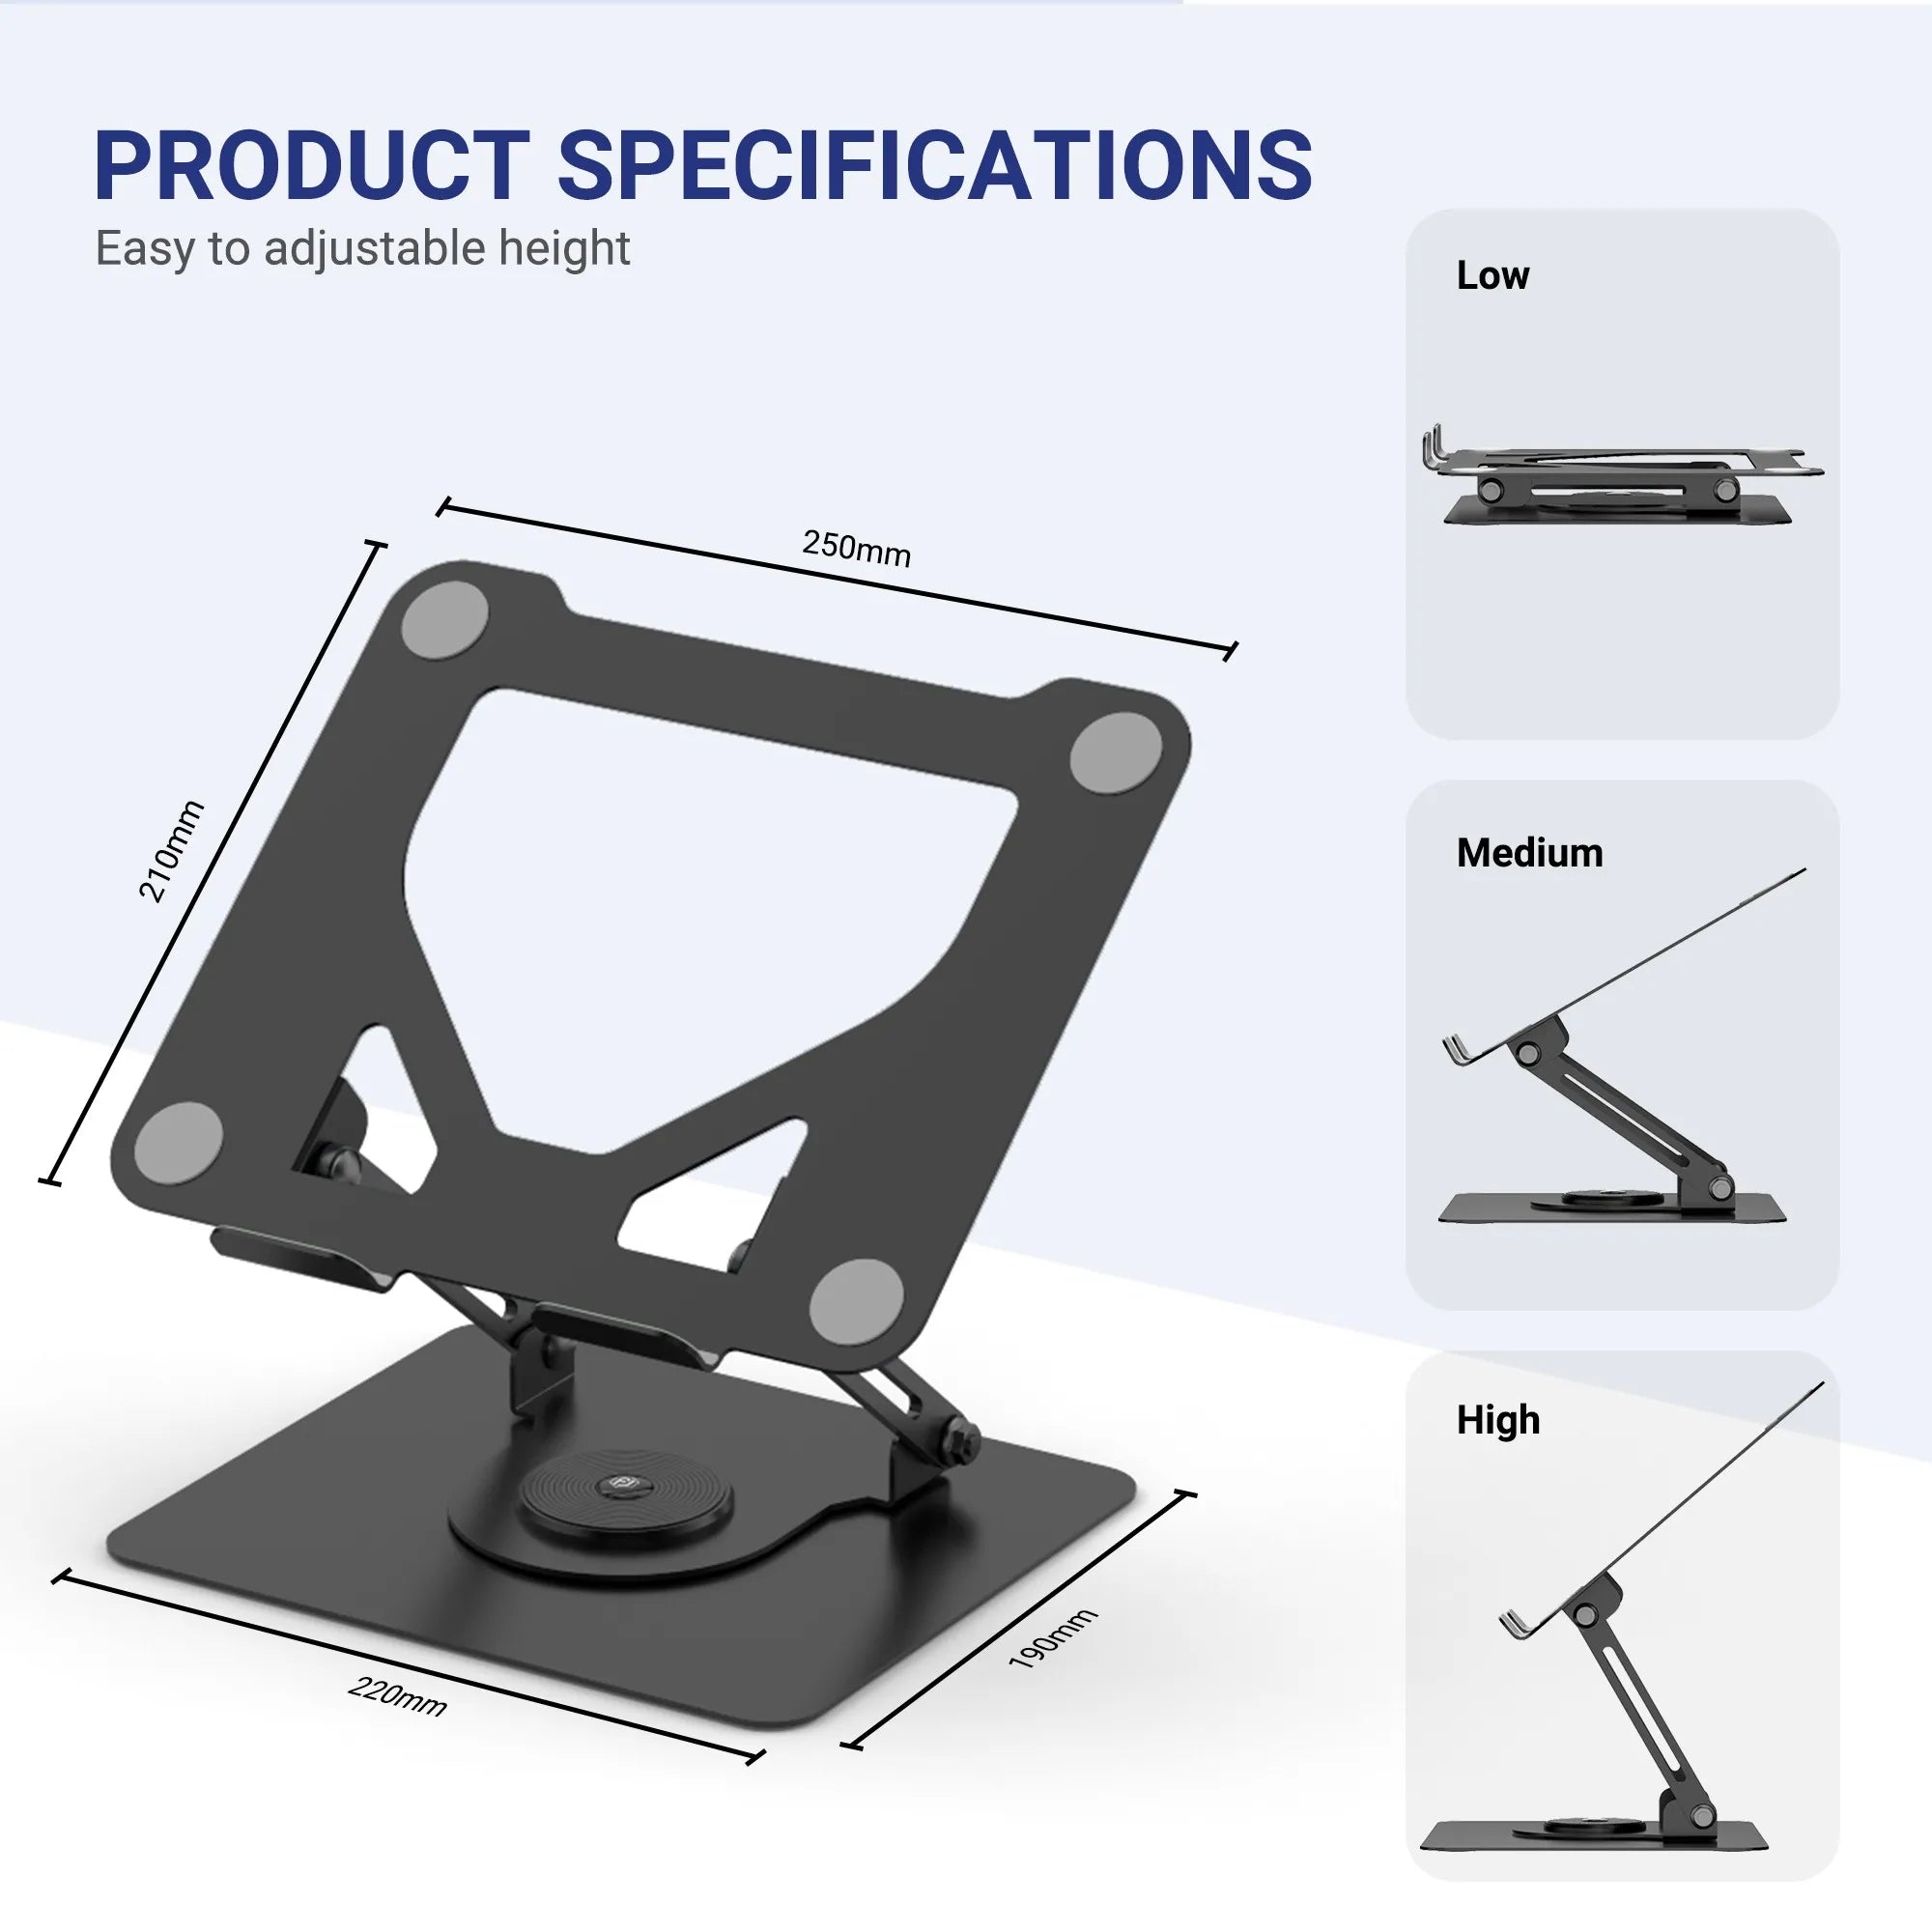 Laptop stand with easy-to-adjust height settings for ergonomic desk configurations in Singapore.